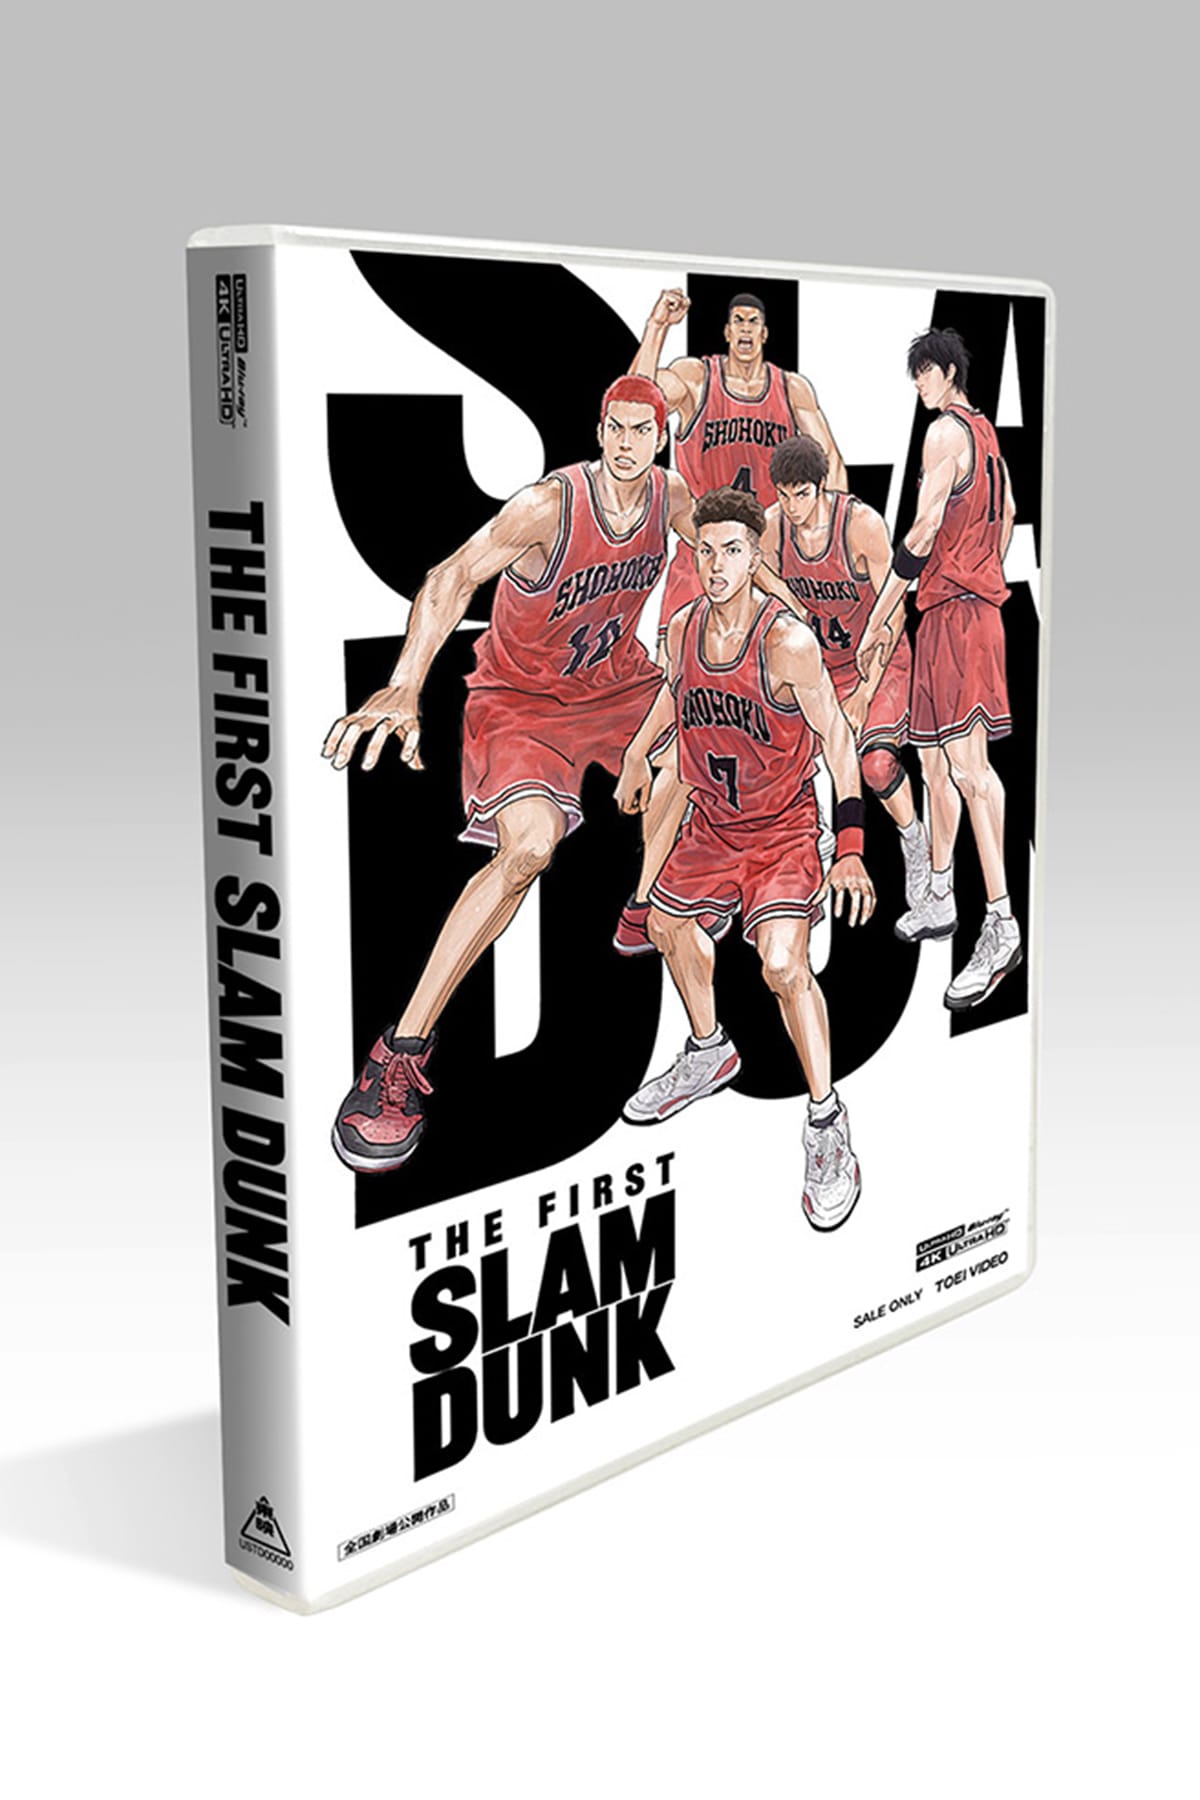 ThefiFirst Slam Dunk